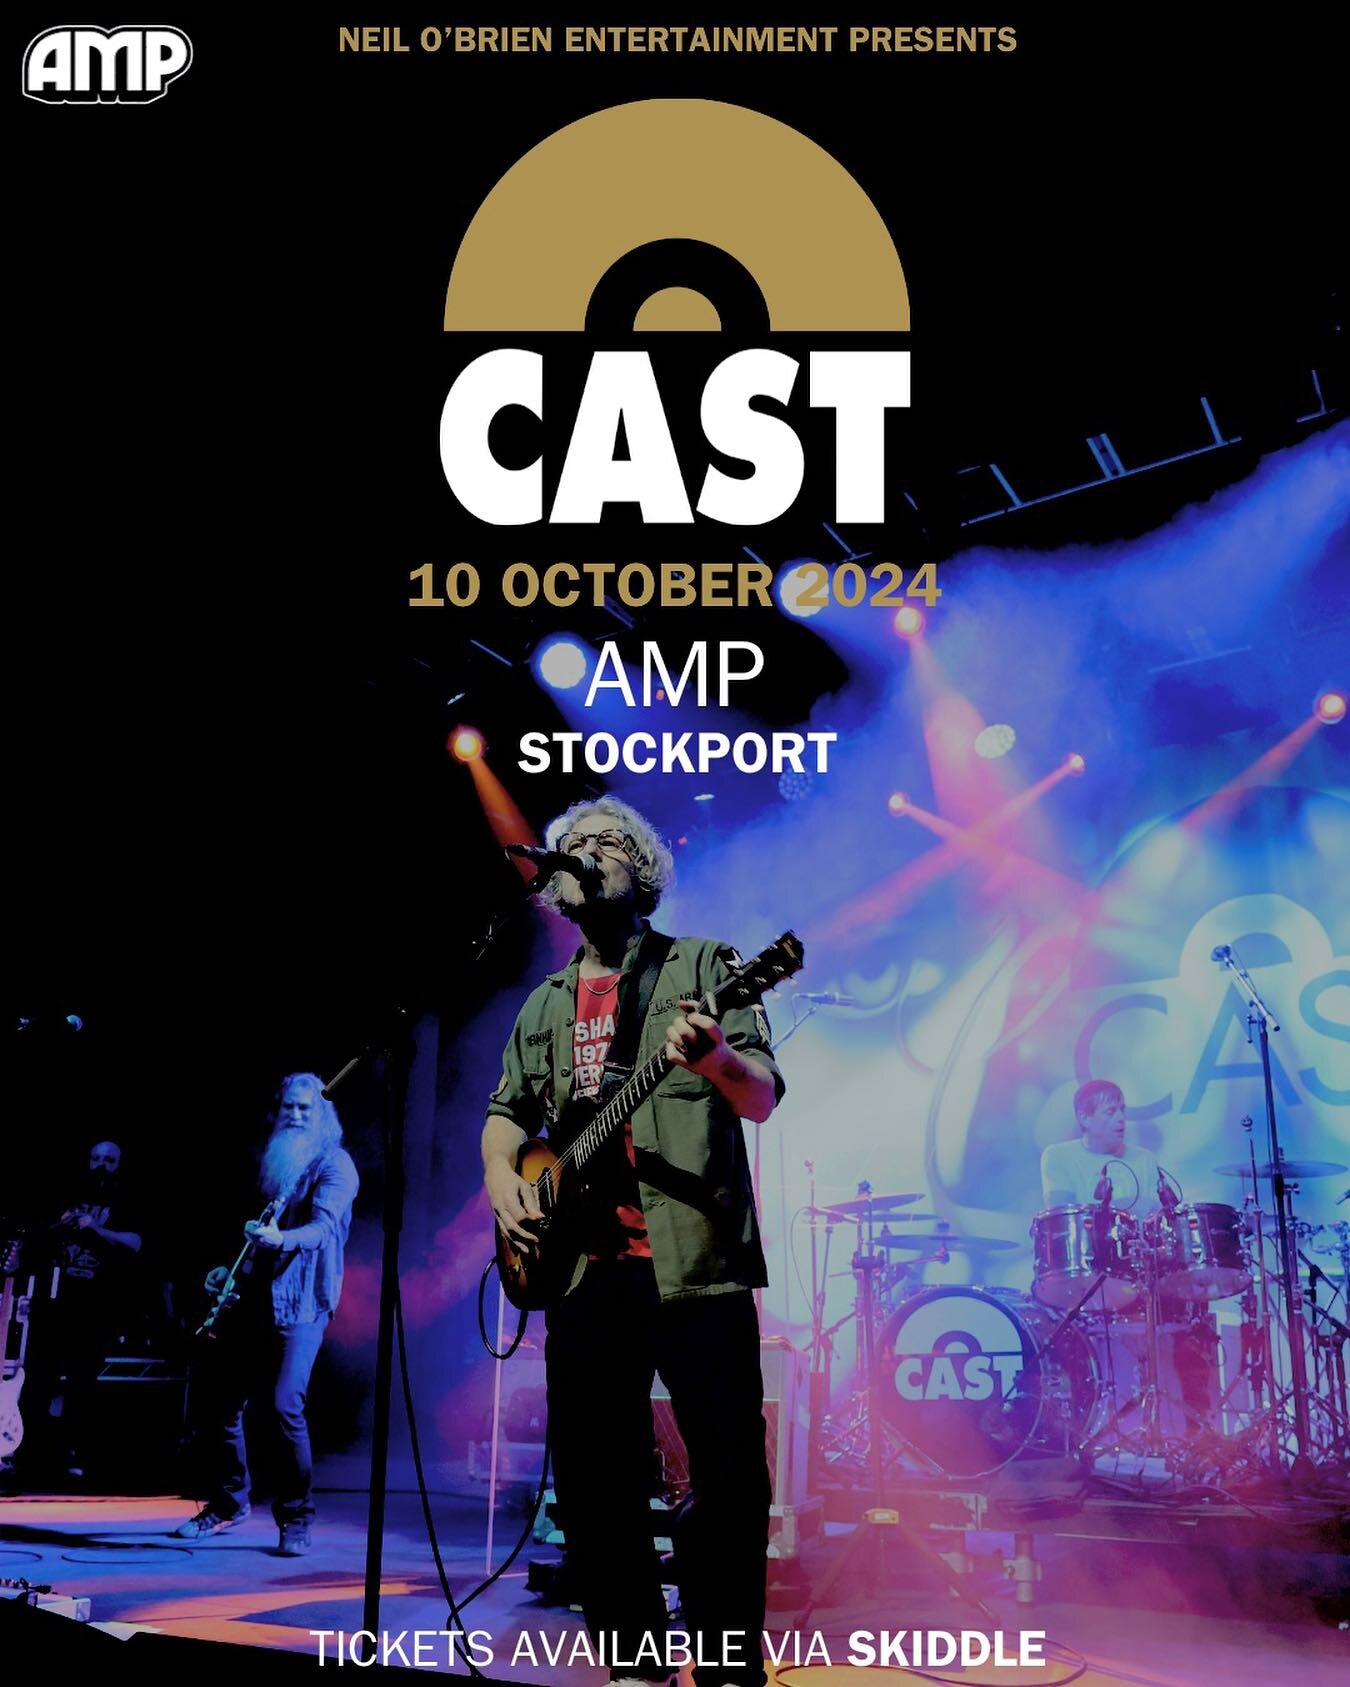 10 October 2024 - We are proud to announce that @castbandofficial will be coming to perform at @ampstockport - PRESALE starts tomorrow/Wednesday 27.3 at 10am // @skiddleuk in bio for presale and general sale afterwards. 

We can&rsquo;t wait to see y